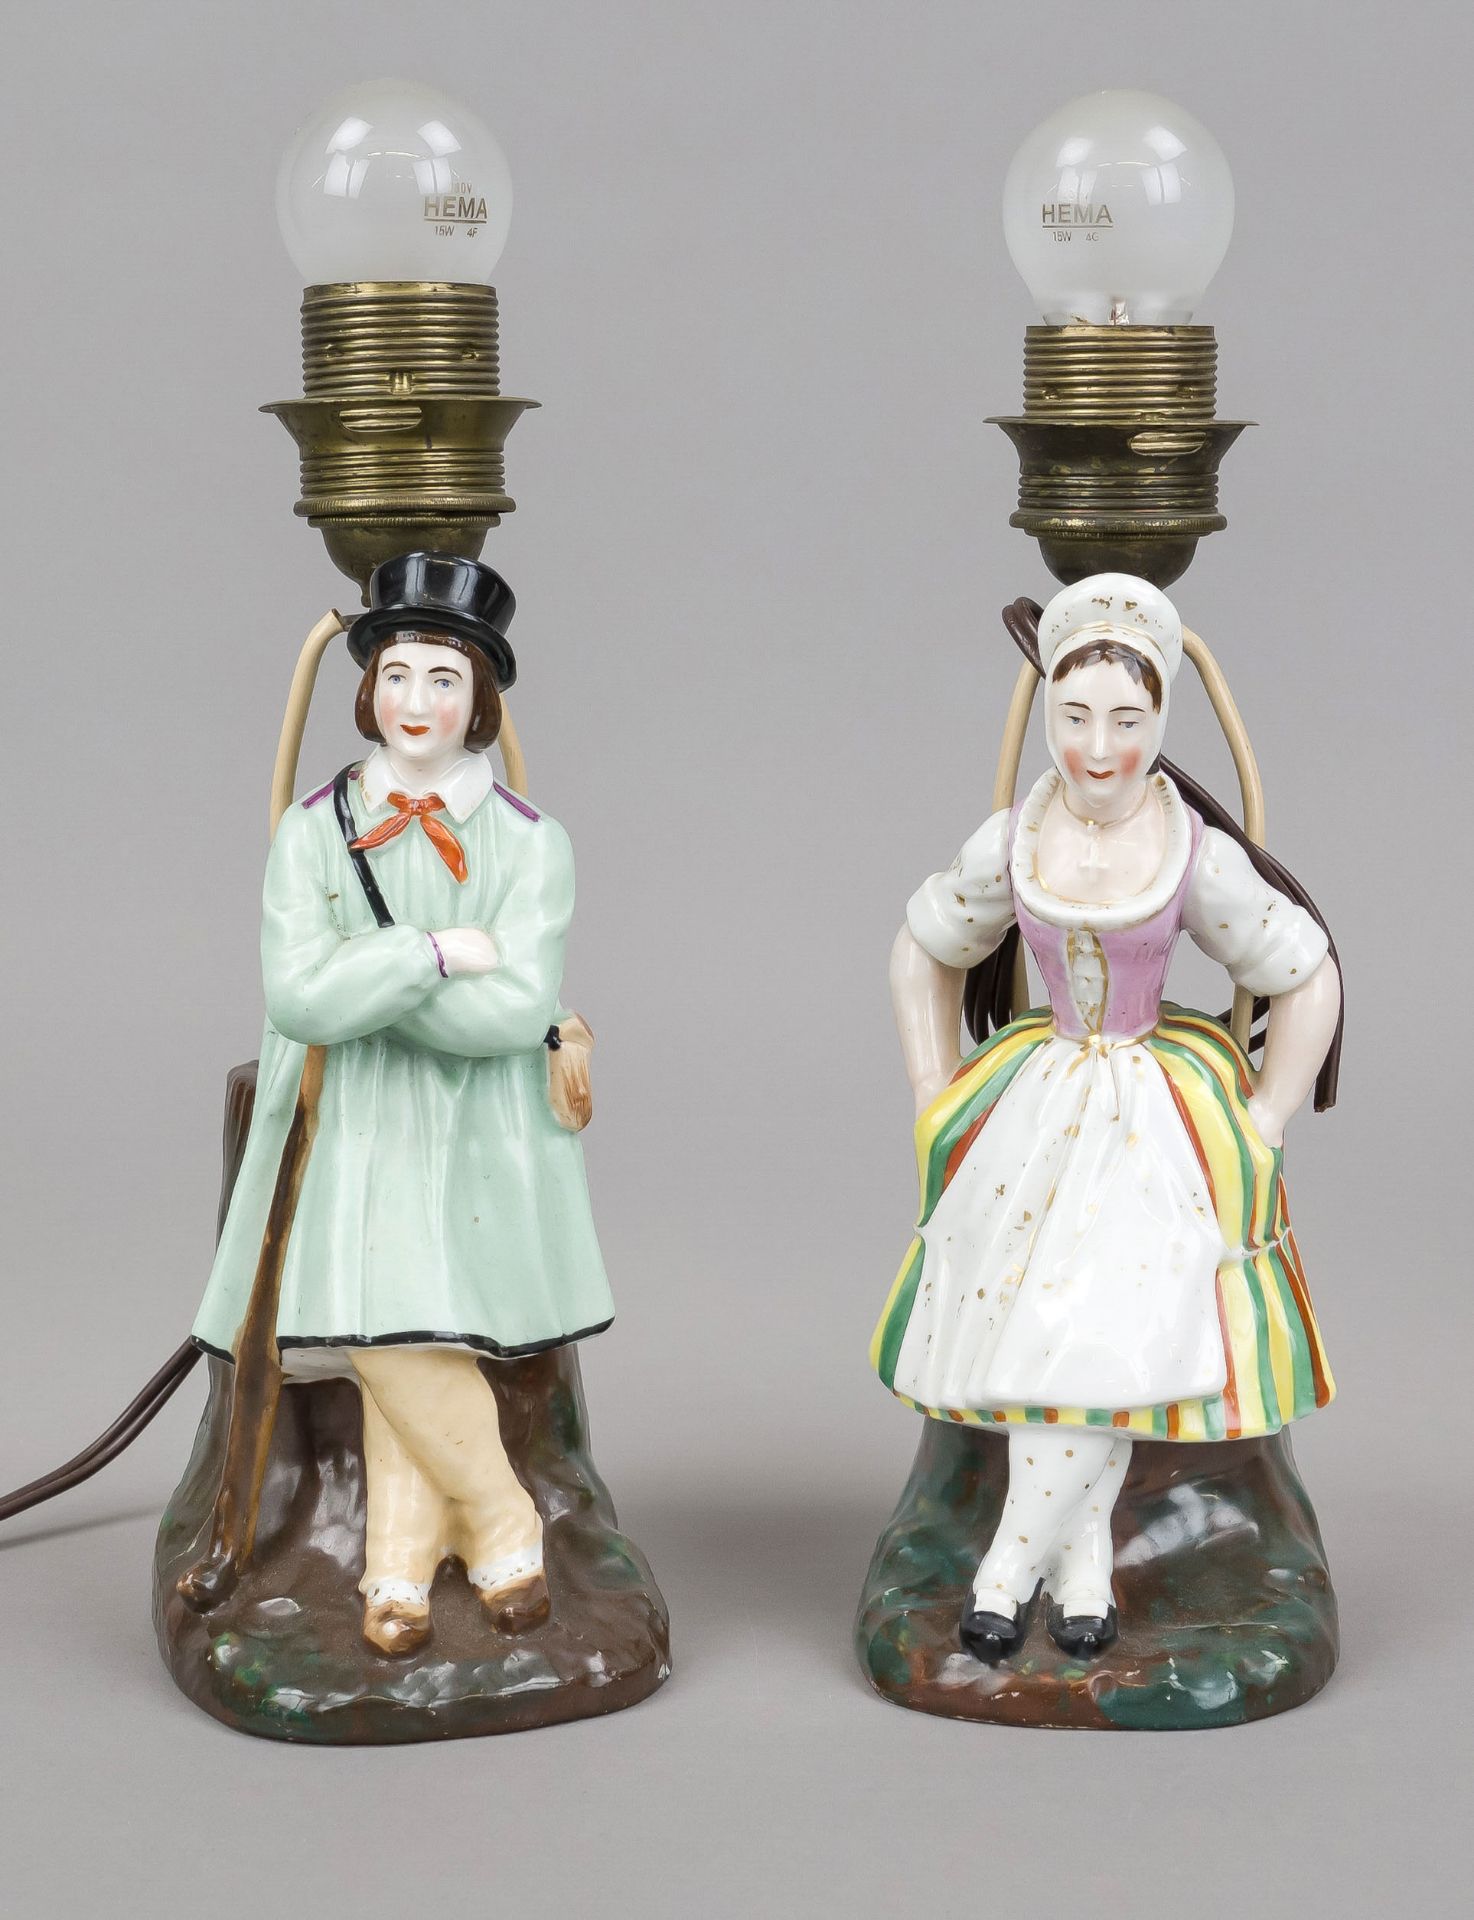 Pair of figural lamp bases as pendants, w. England, 20th century, polychrome painted, ornamental